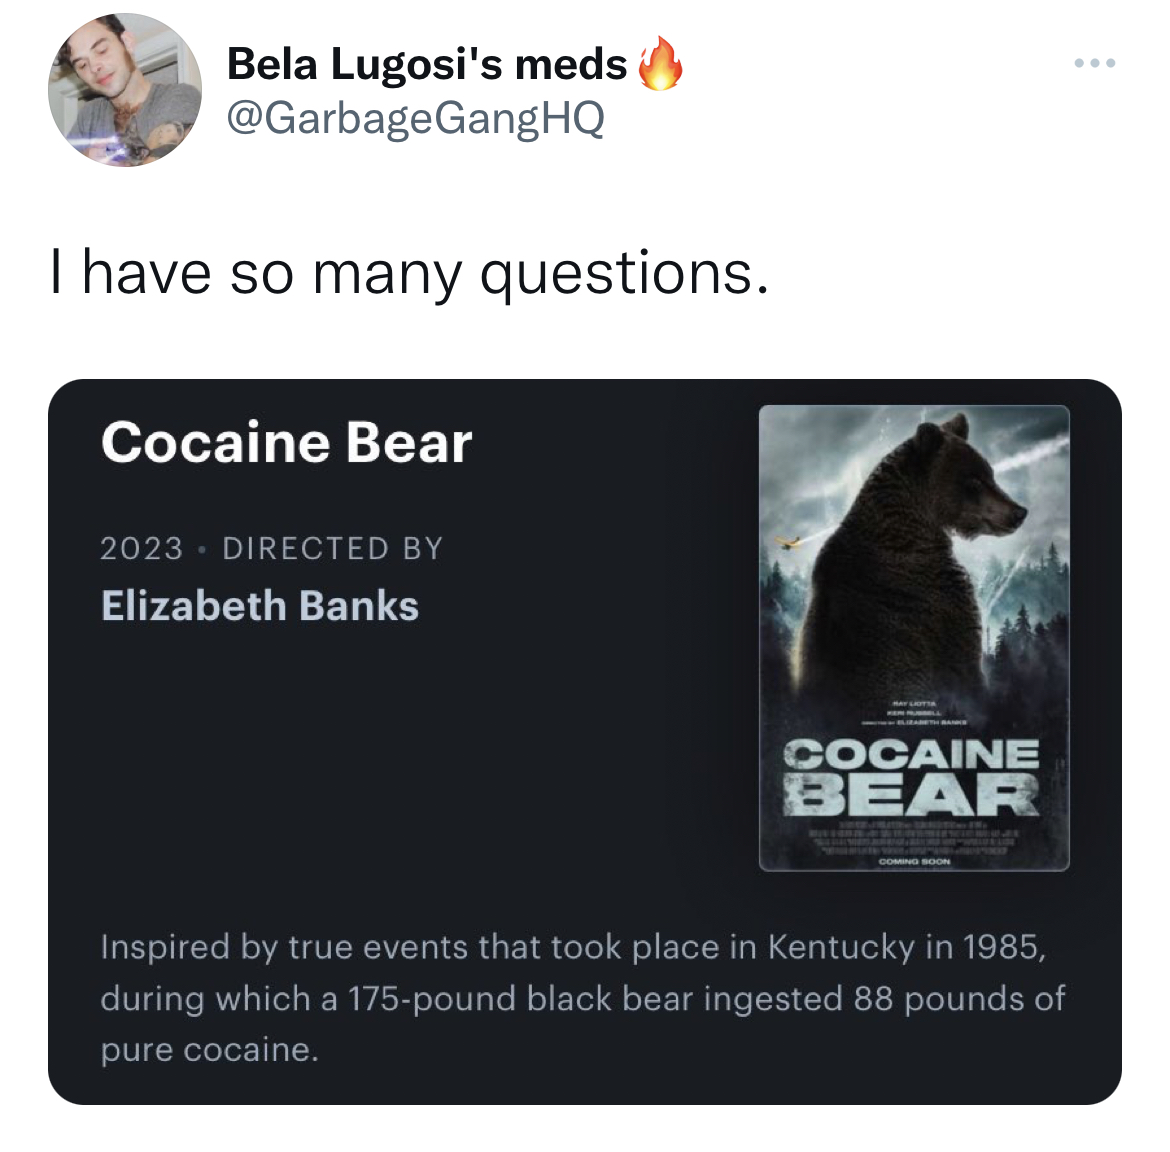 multimedia - Bela Lugosi's meds I have so many questions. Cocaine Bear 2023 Directed By Elizabeth Banks Cocaine Bear Inspired by true events that took place in Kentucky in 1985, during which a 175pound black bear ingested 88 pounds of pure cocaine.